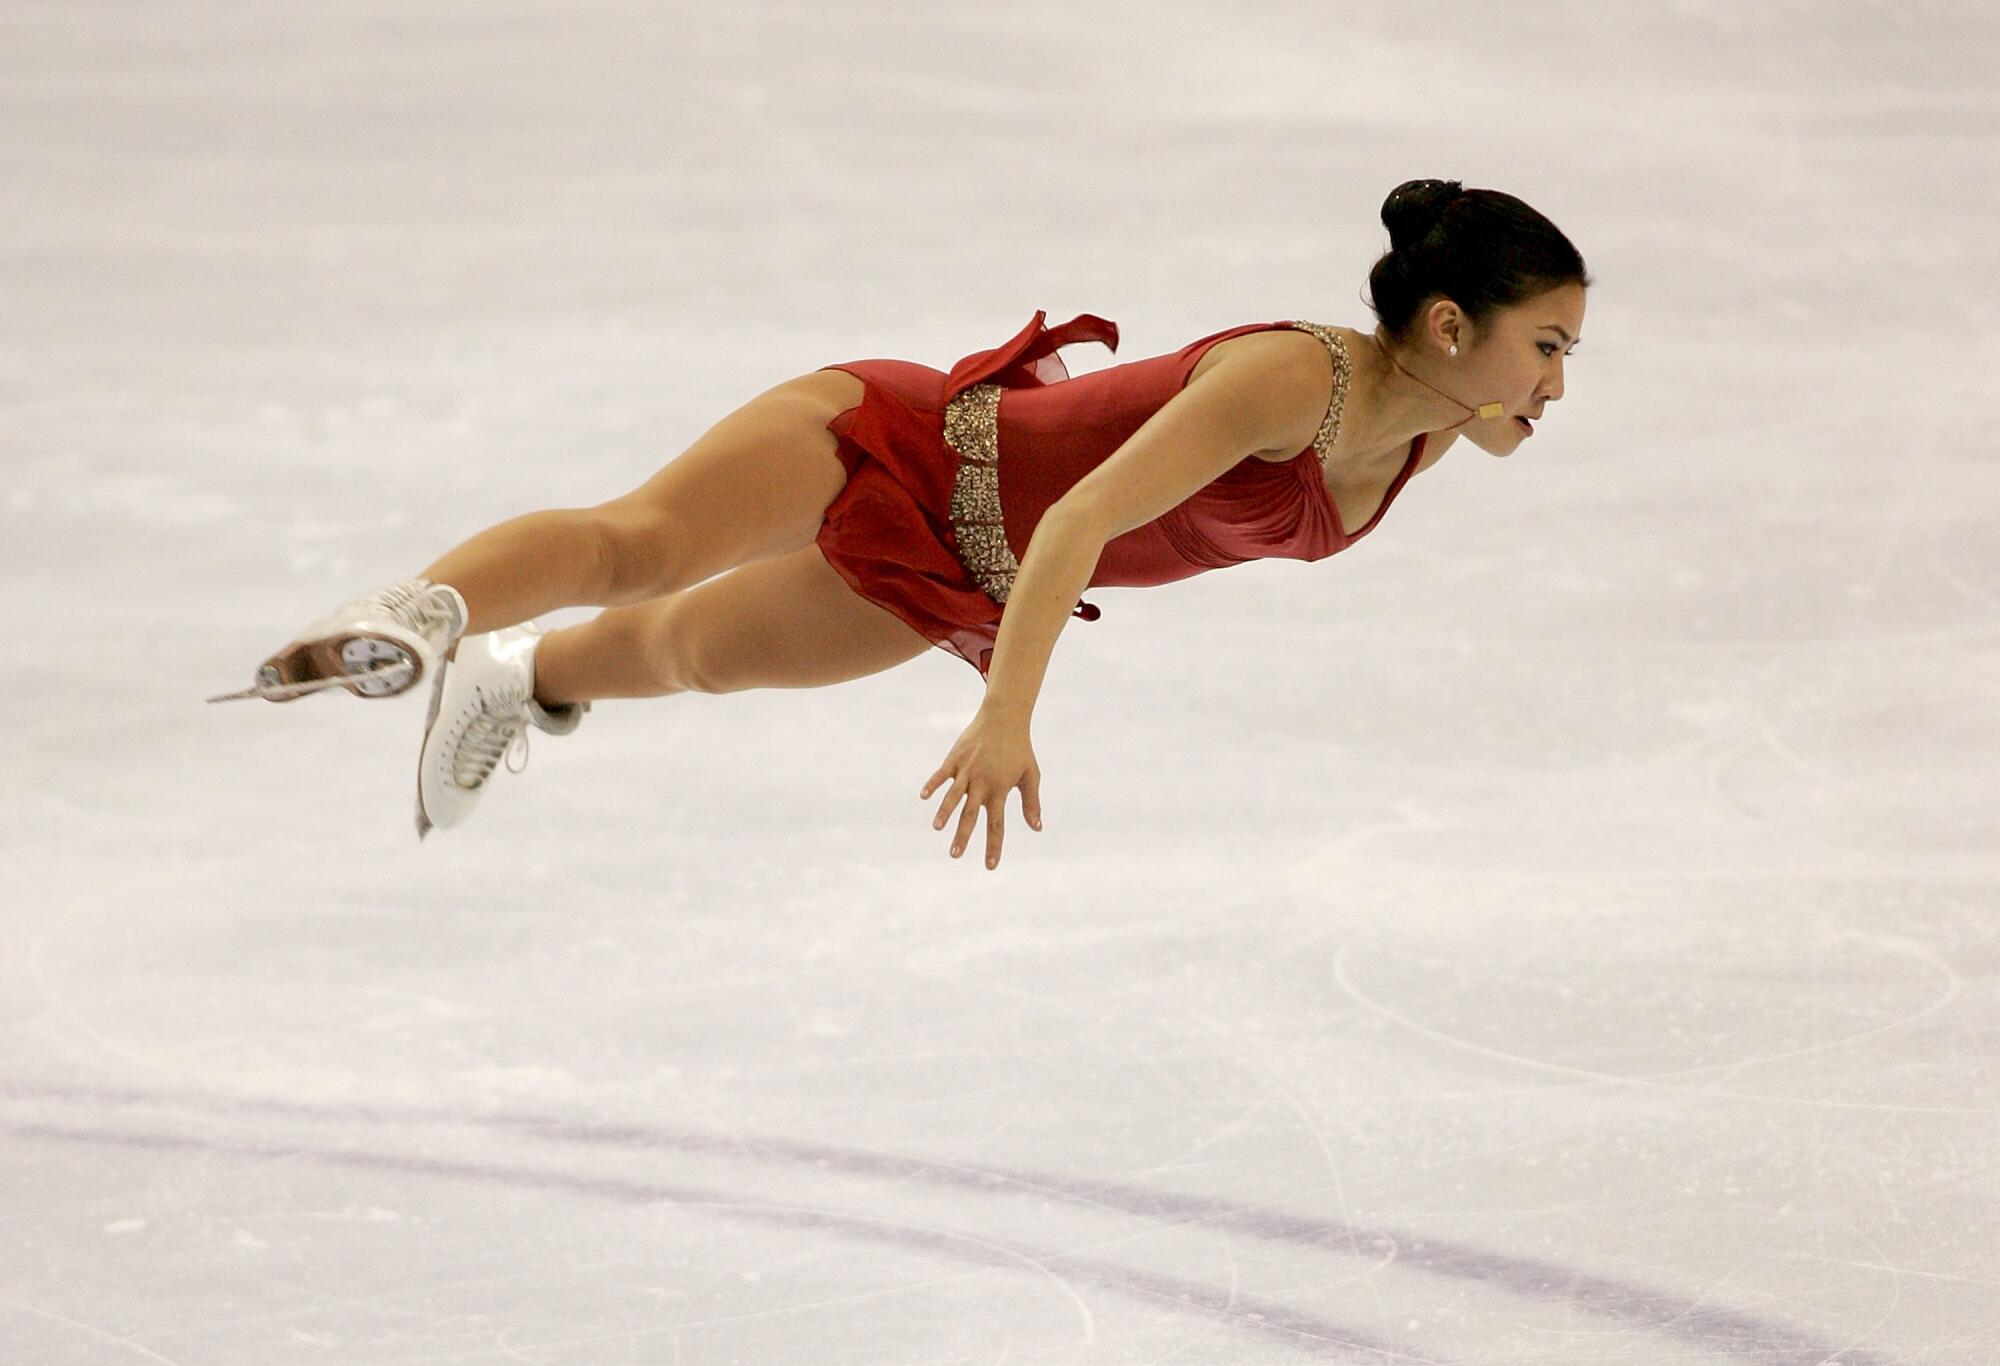 Michelle Kwan competing in the women's short program during the 1995 U.S. Figure Skating Championships in Portland, Ore. Kwan finished her career with nine U.S. titles.